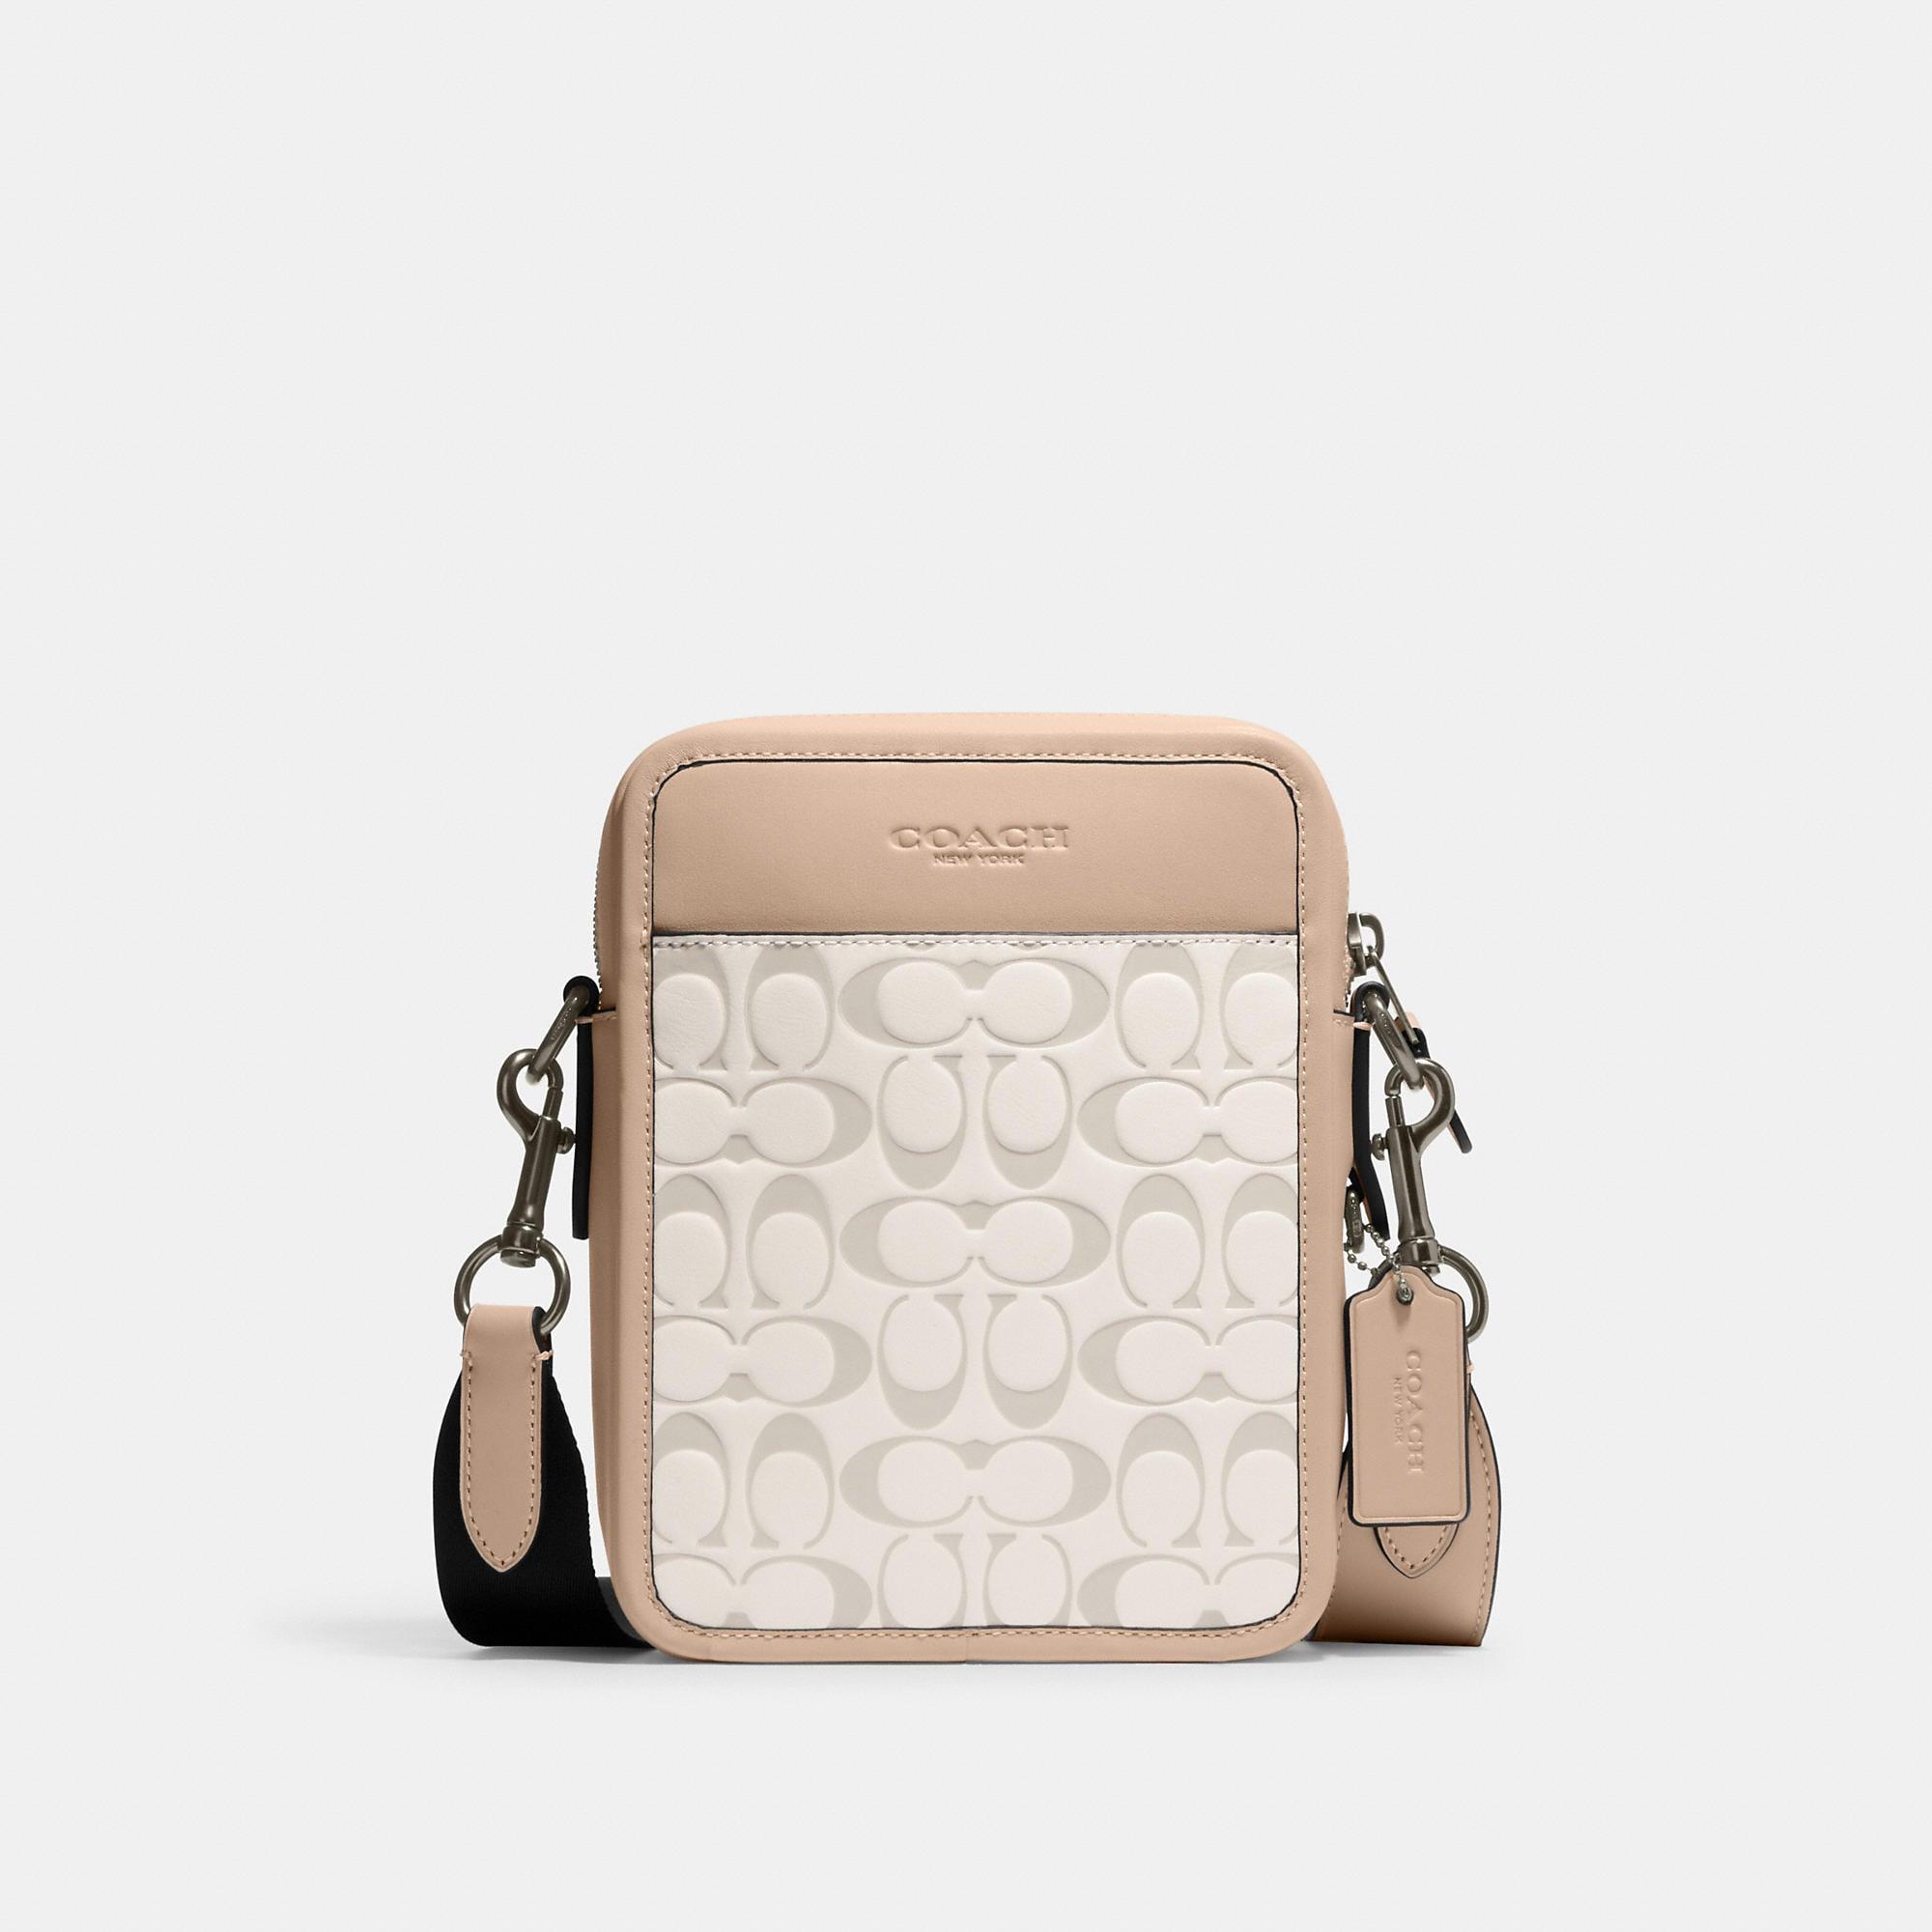 Coach Outlet Sullivan Crossbody In Signature Leather in Natural